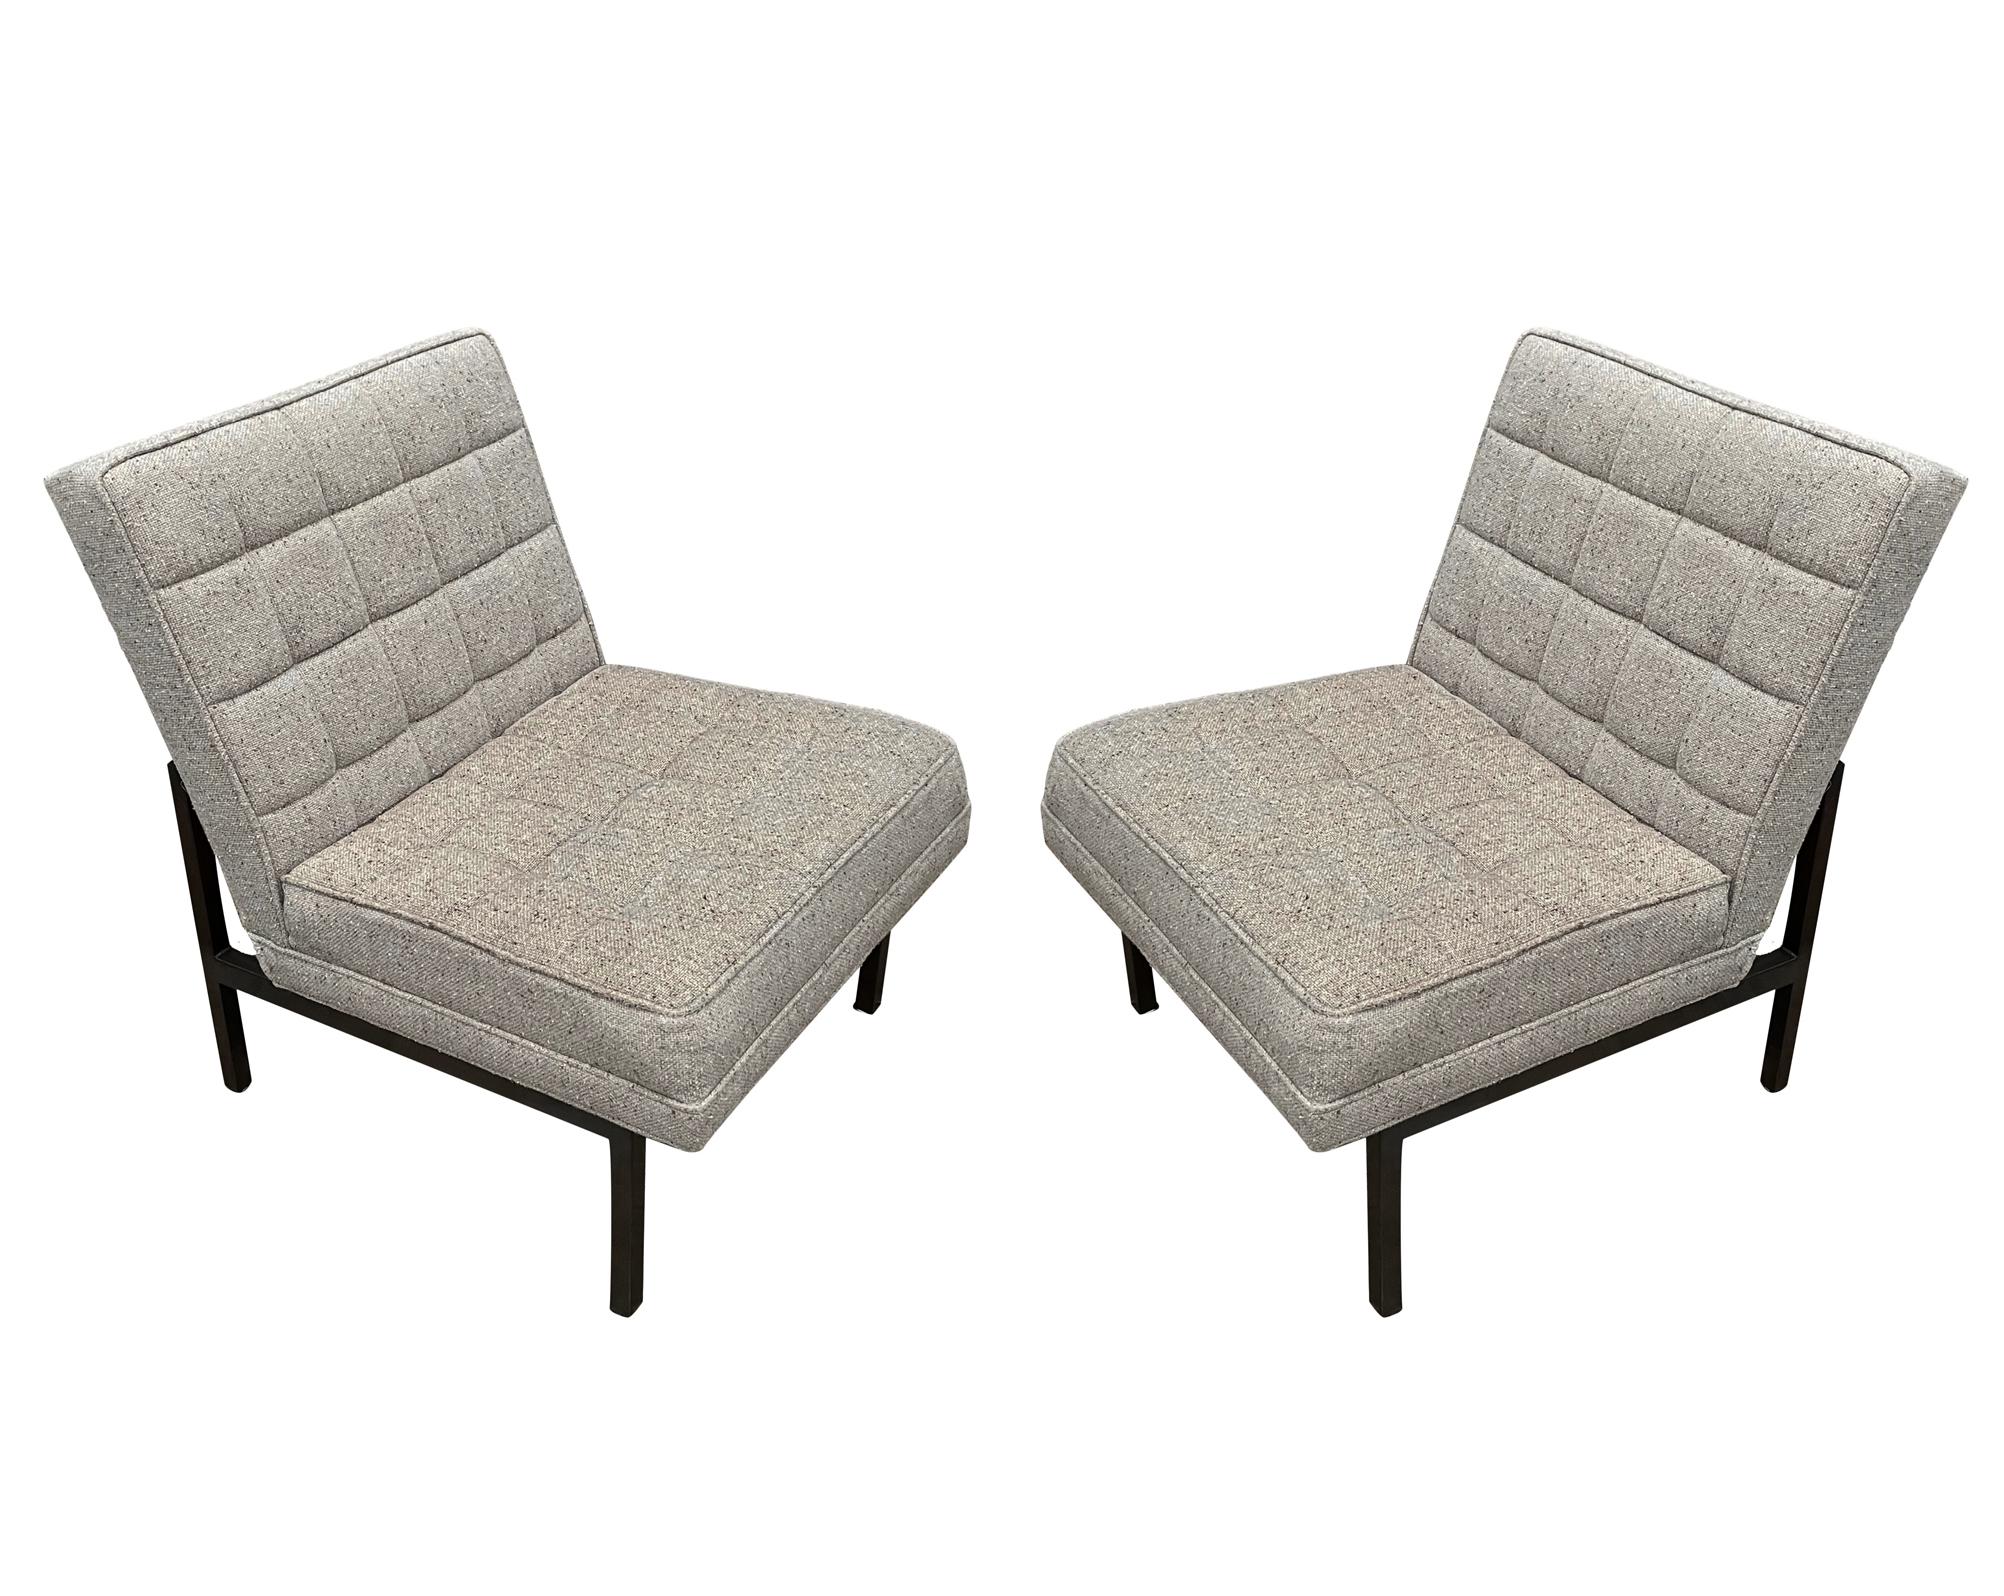 Late 20th Century Mid-Century Modern Slipper Lounge Chairs in Grey Tweed with Bronze Frames For Sale